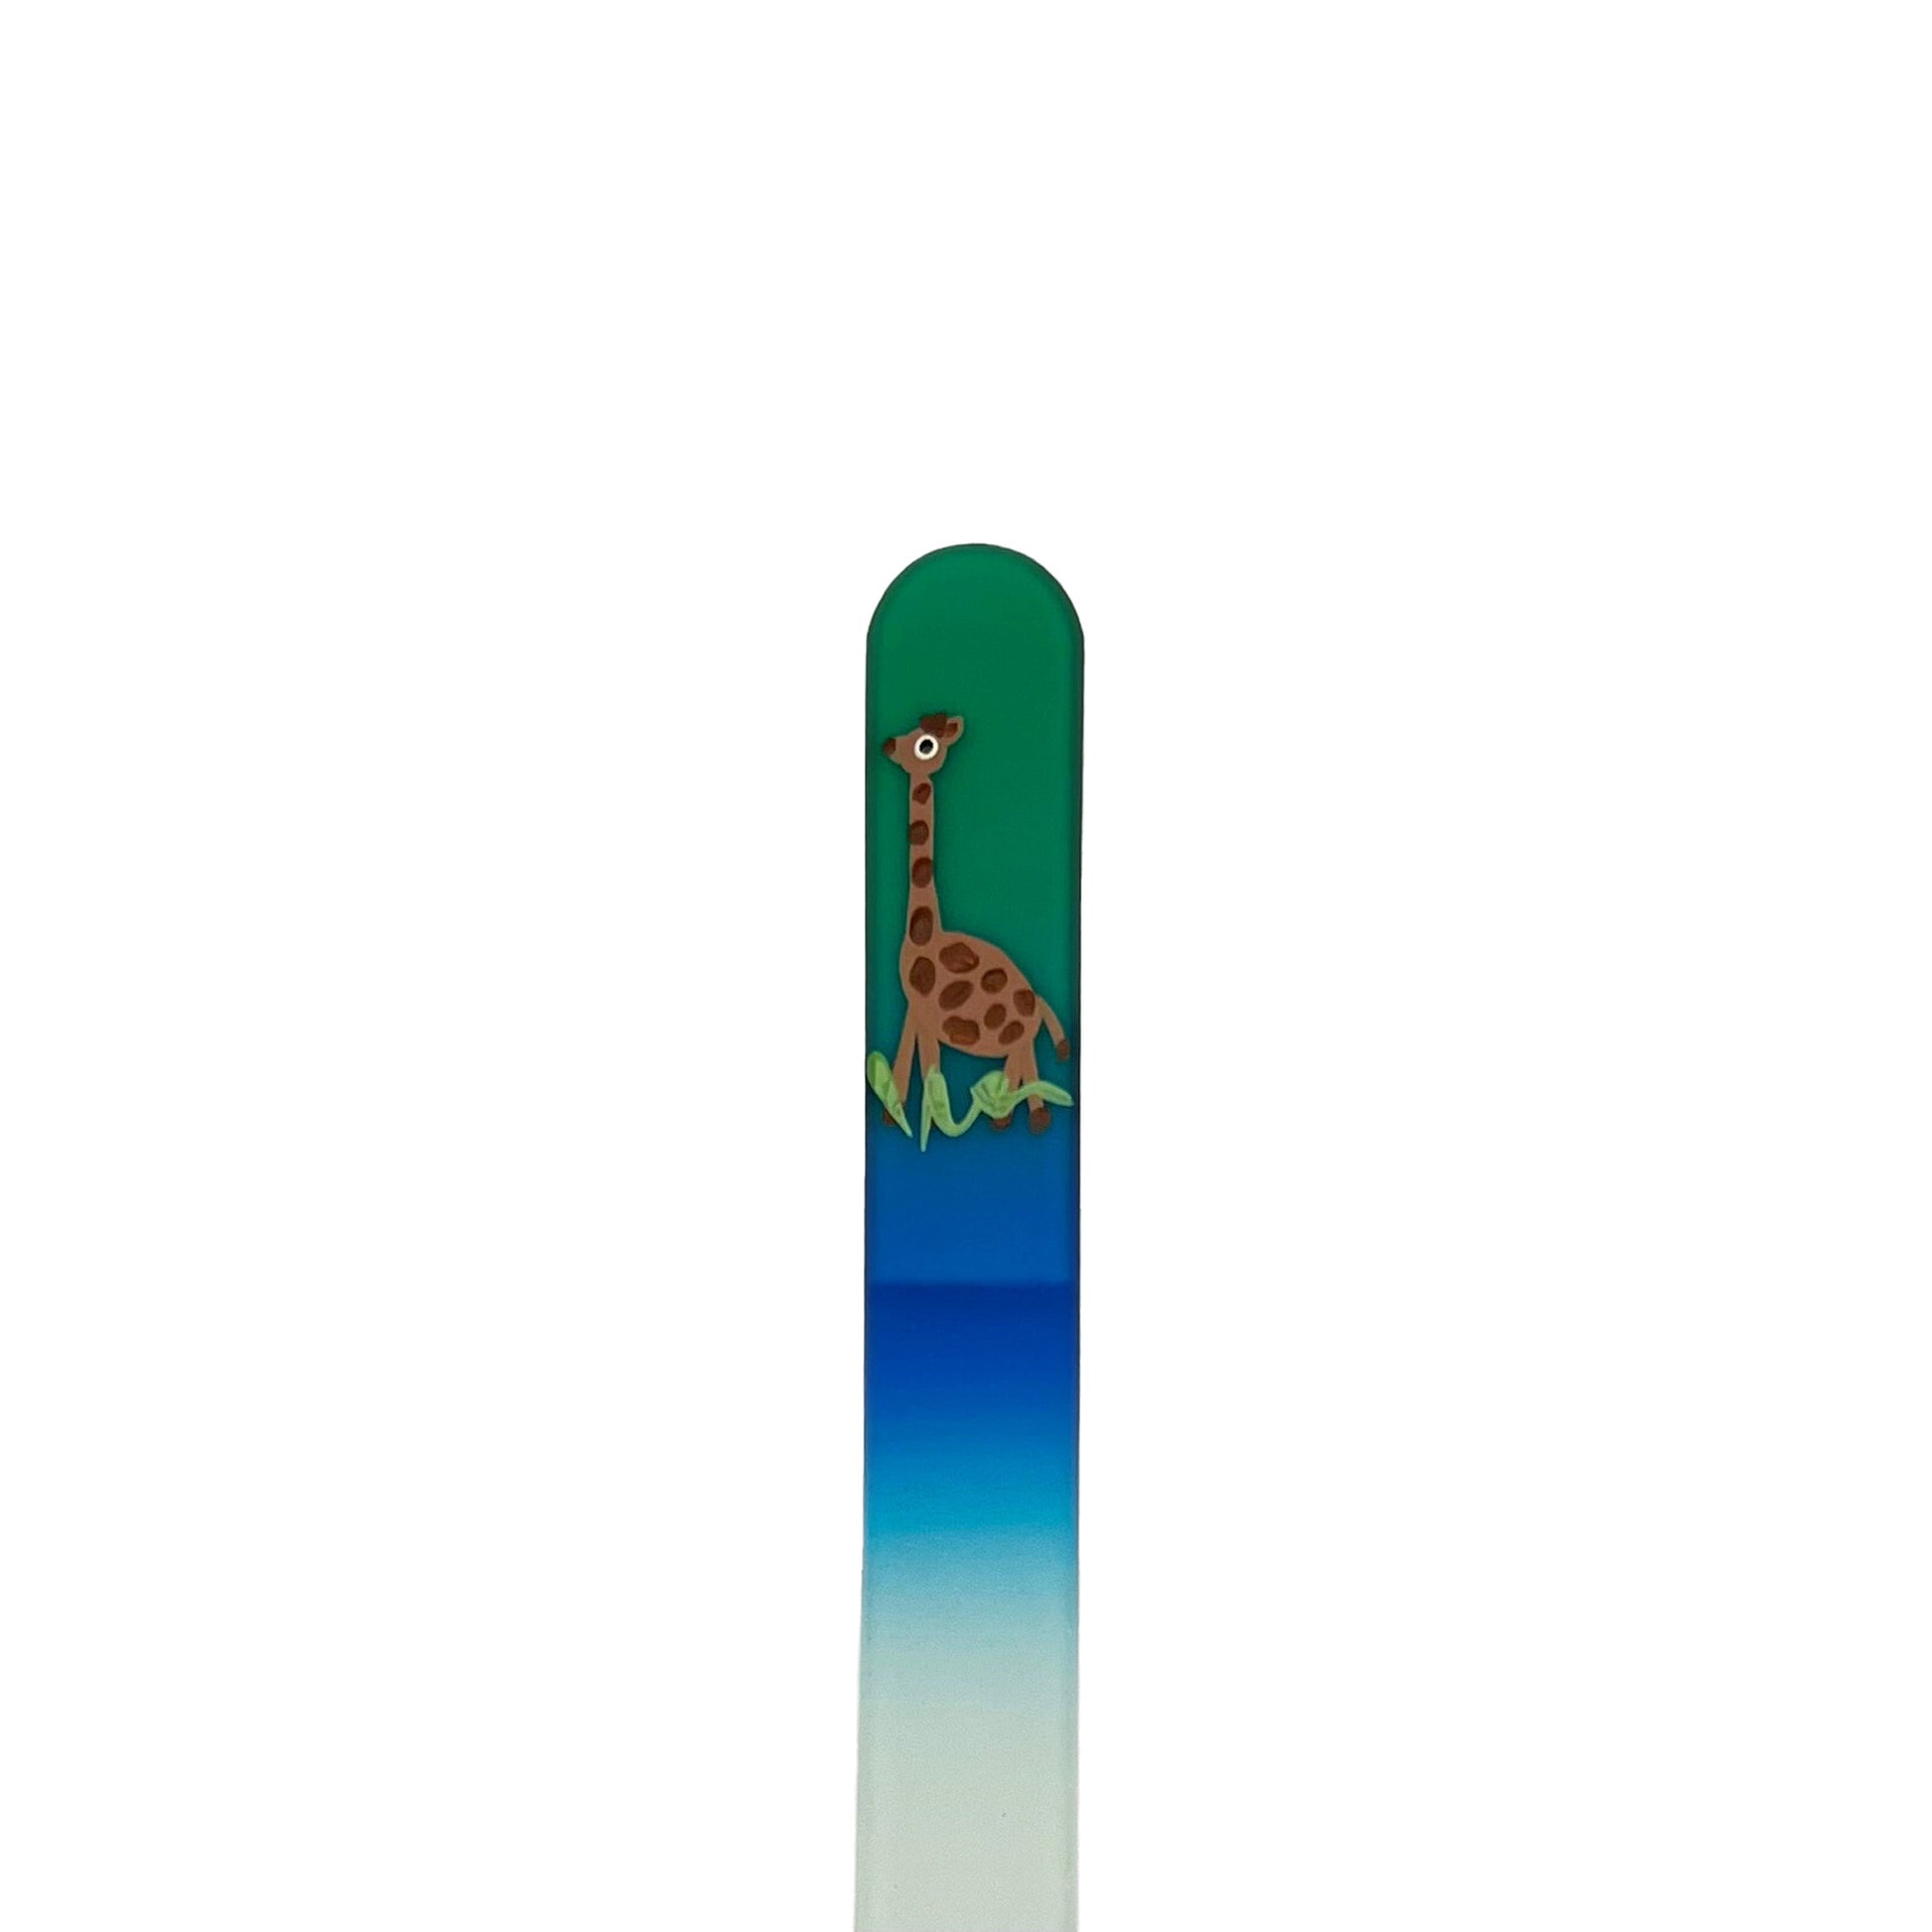 green and blue glass nail file with hand painted giraffe